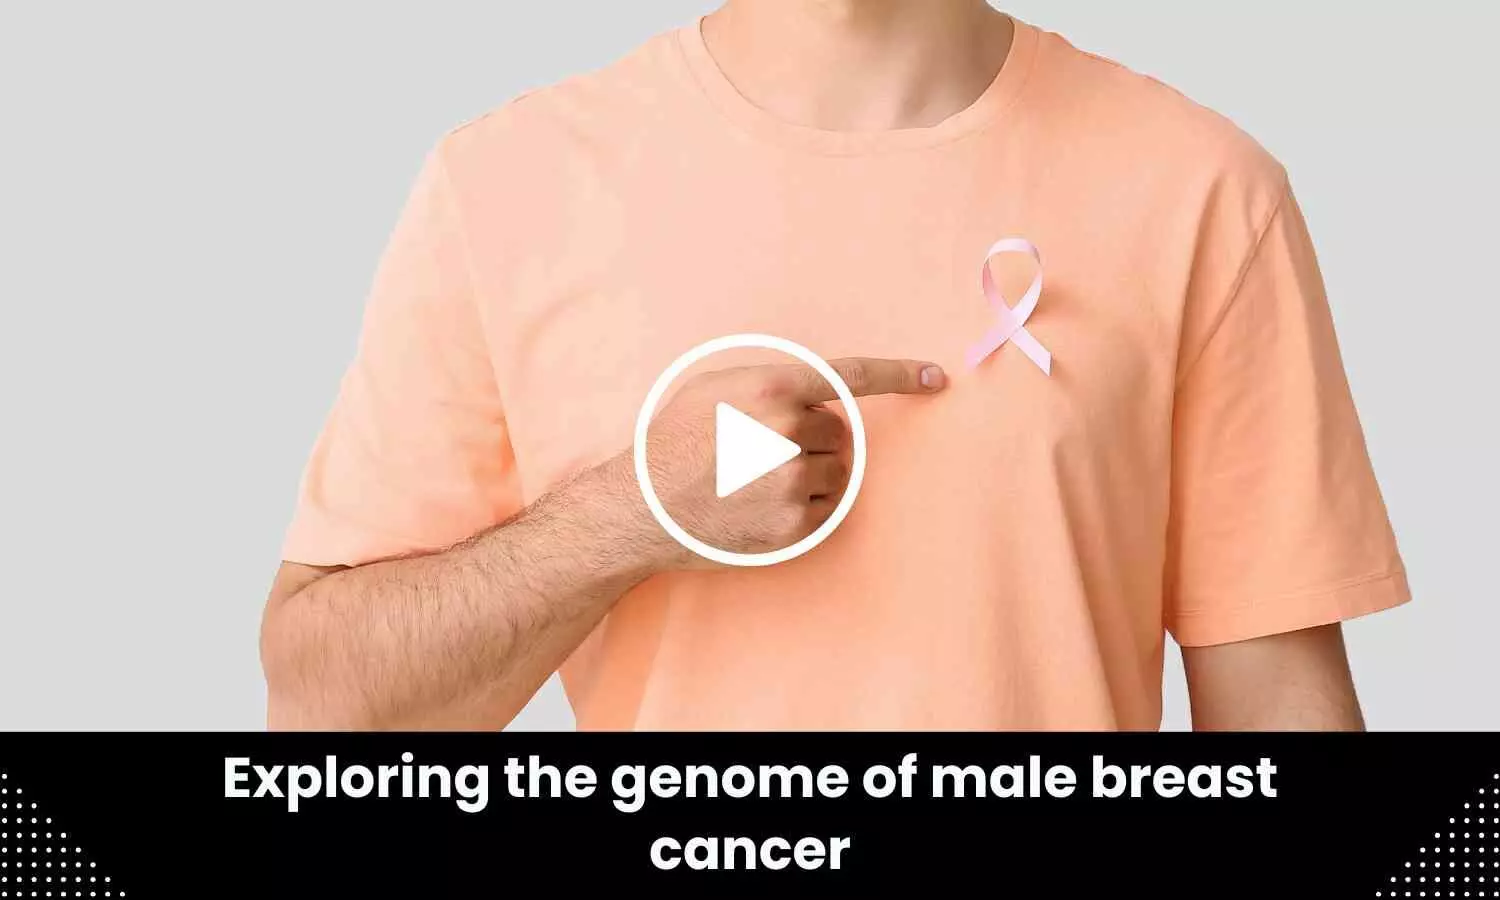 Exploring the genome of male breast cancer